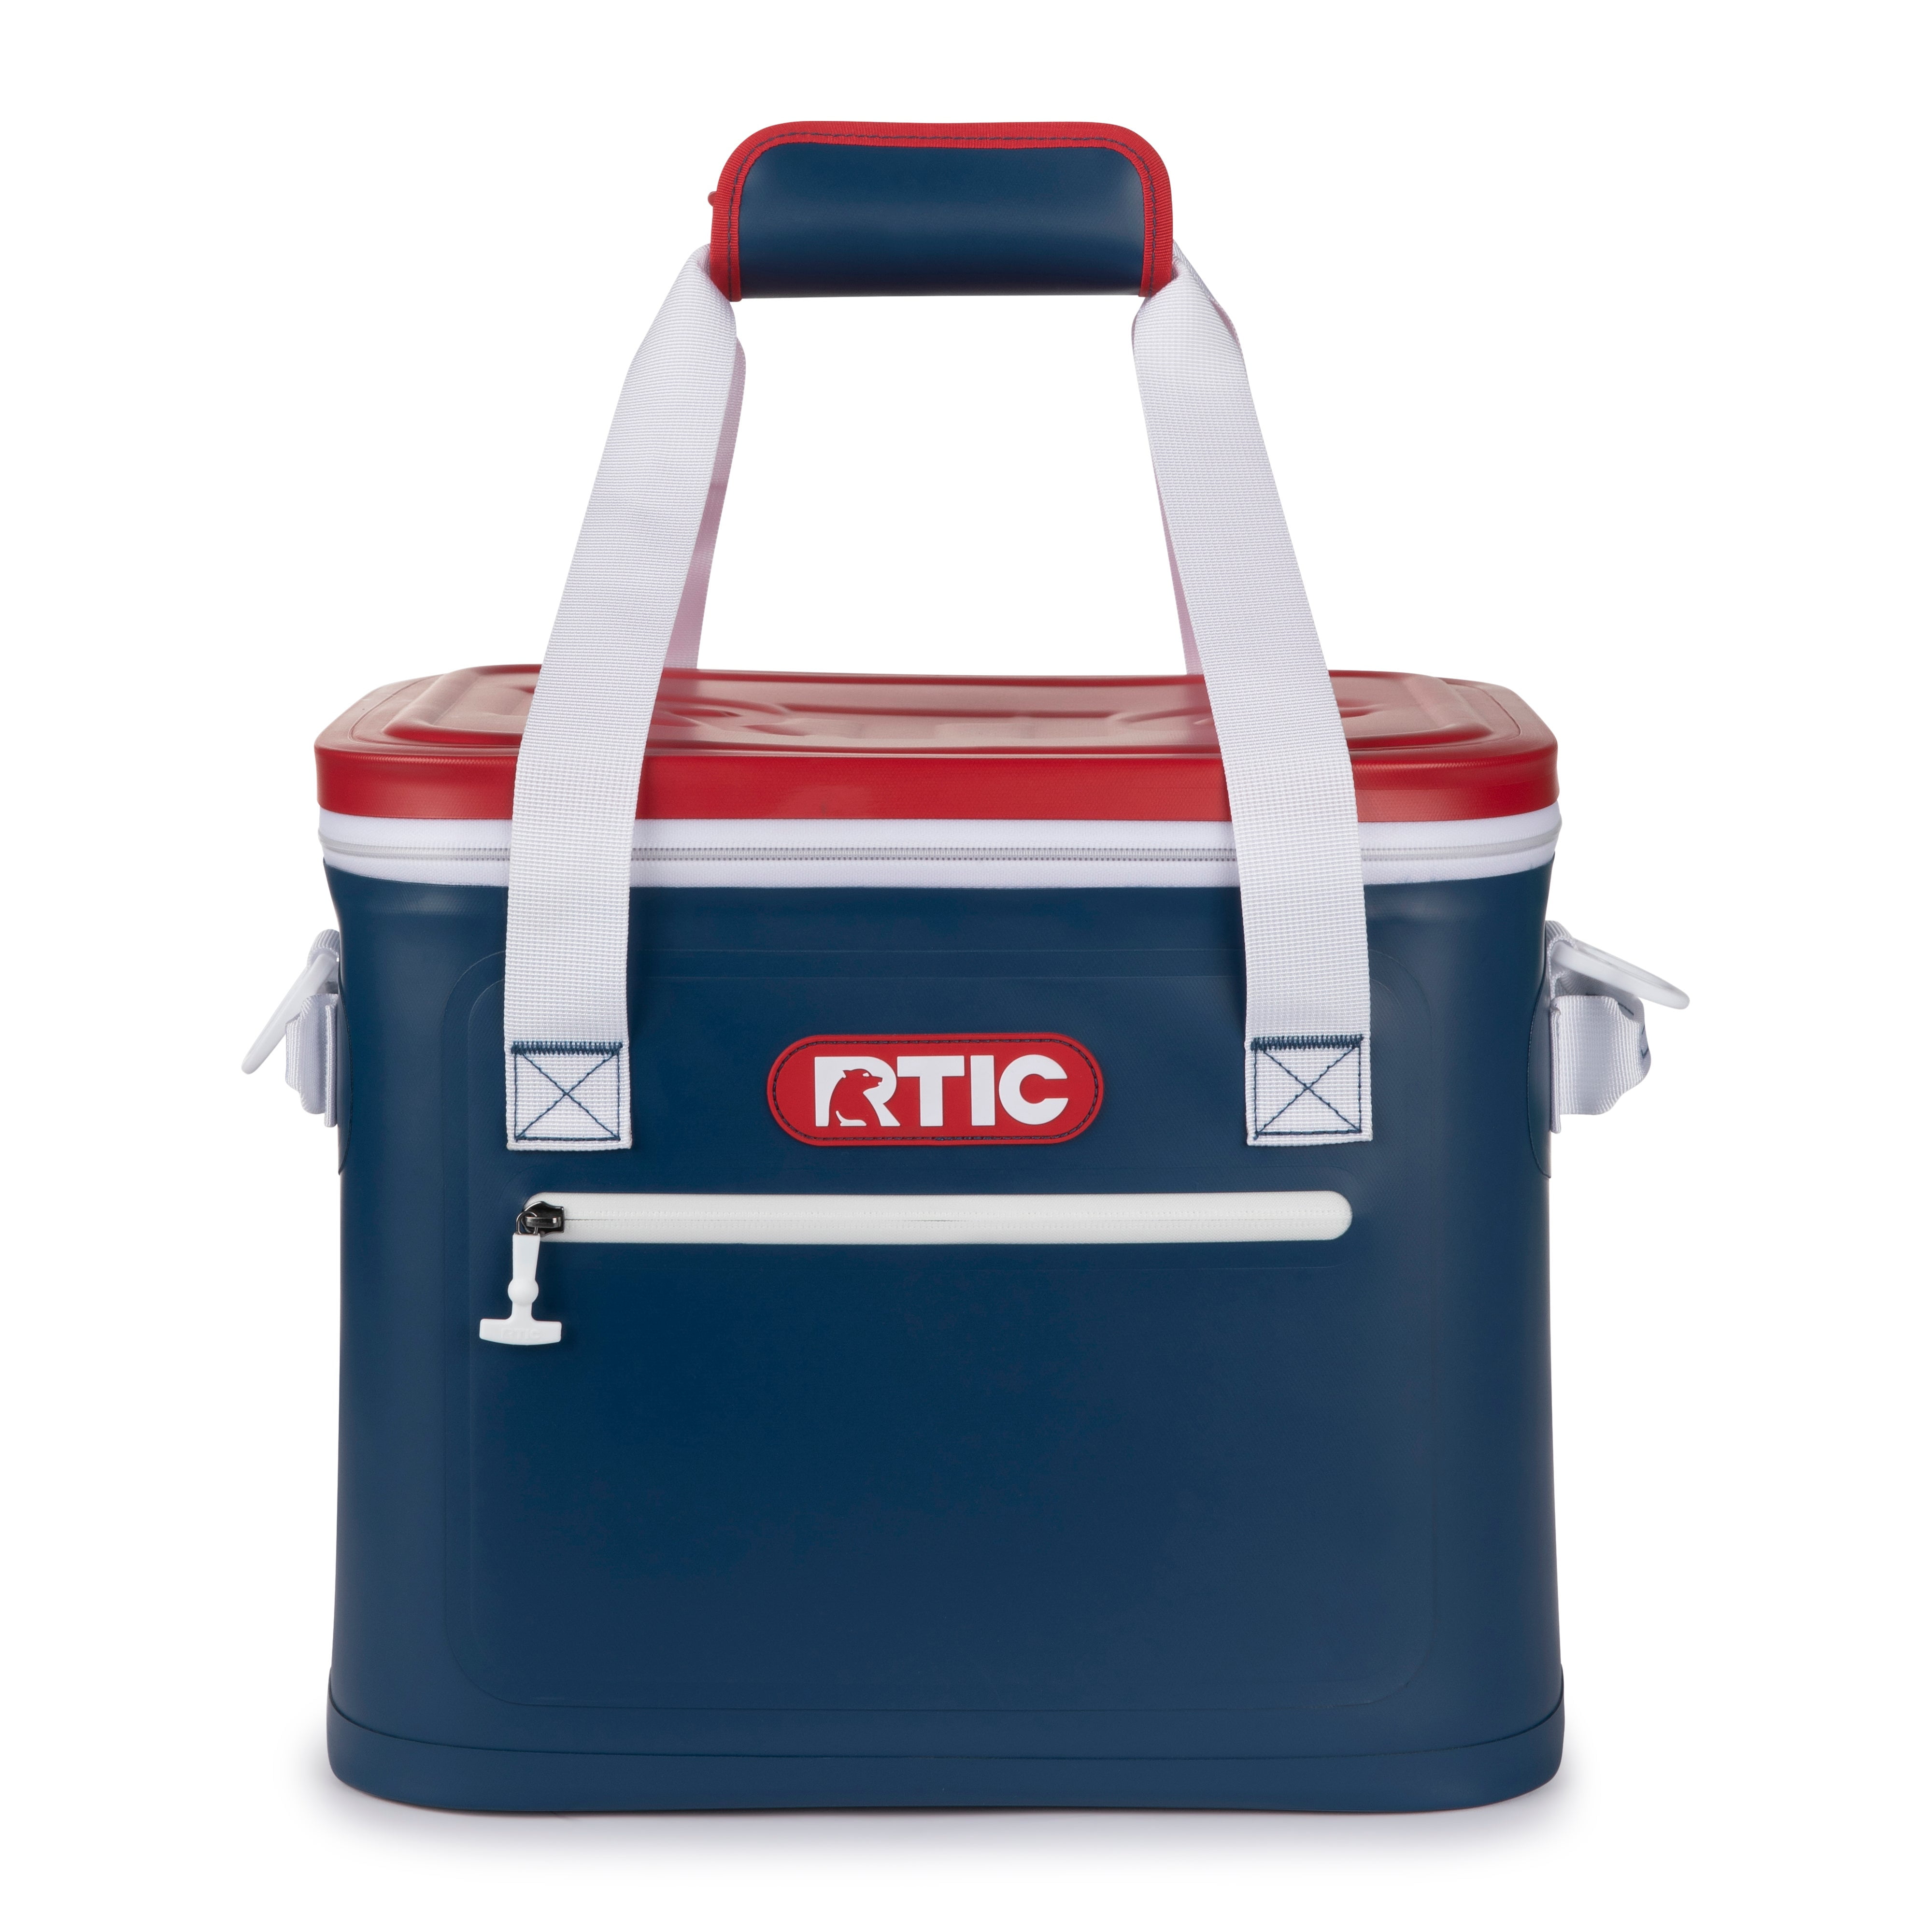 RTIC Soft Cooler 40 Can, Insulated Bag Portable Ice Chest Box for Lunch,  Beach, Drink, Beverage, Travel, Camping, Picnic, Car, Trips, Floating Cooler  Leak-Proof with Zipper, Blue / Grey 